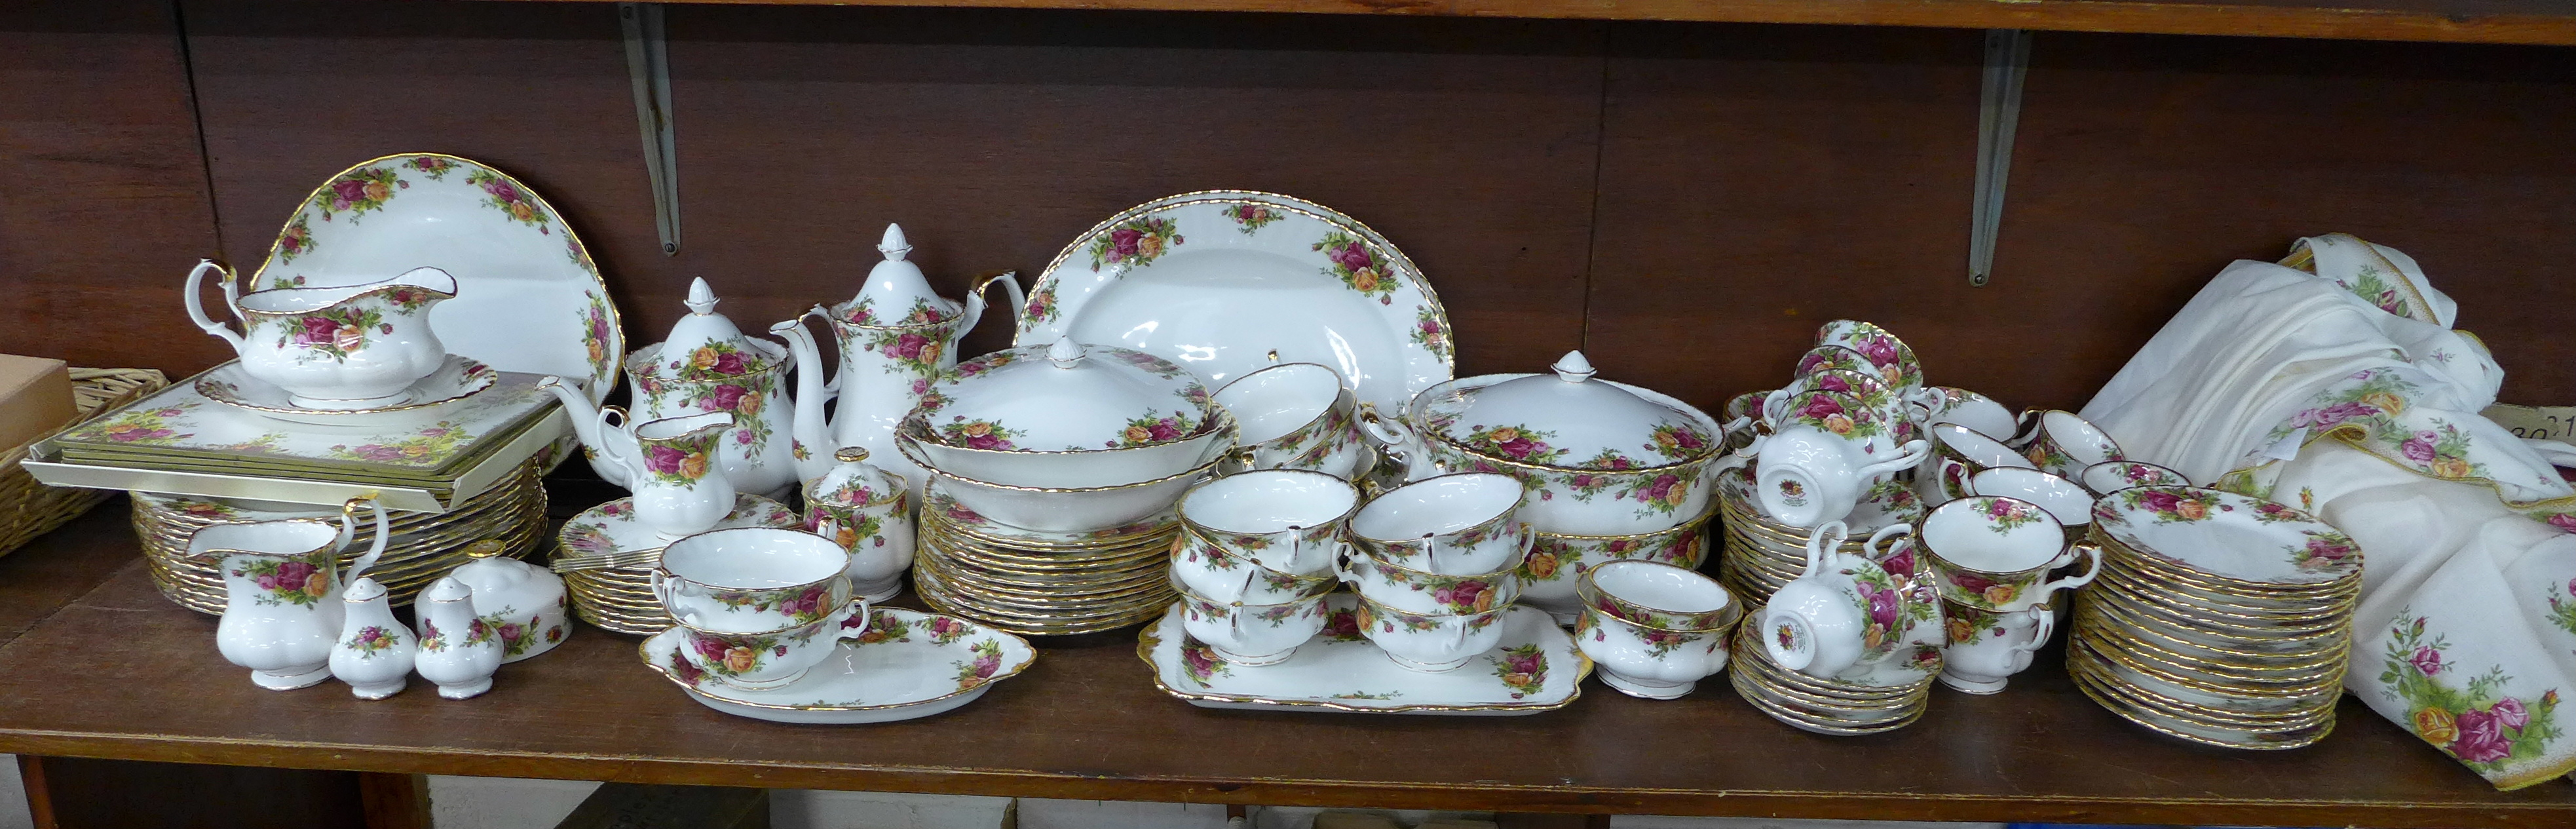 A large quantity of Royal Albert Old Country Roses dinner and teaware, including coffee service,